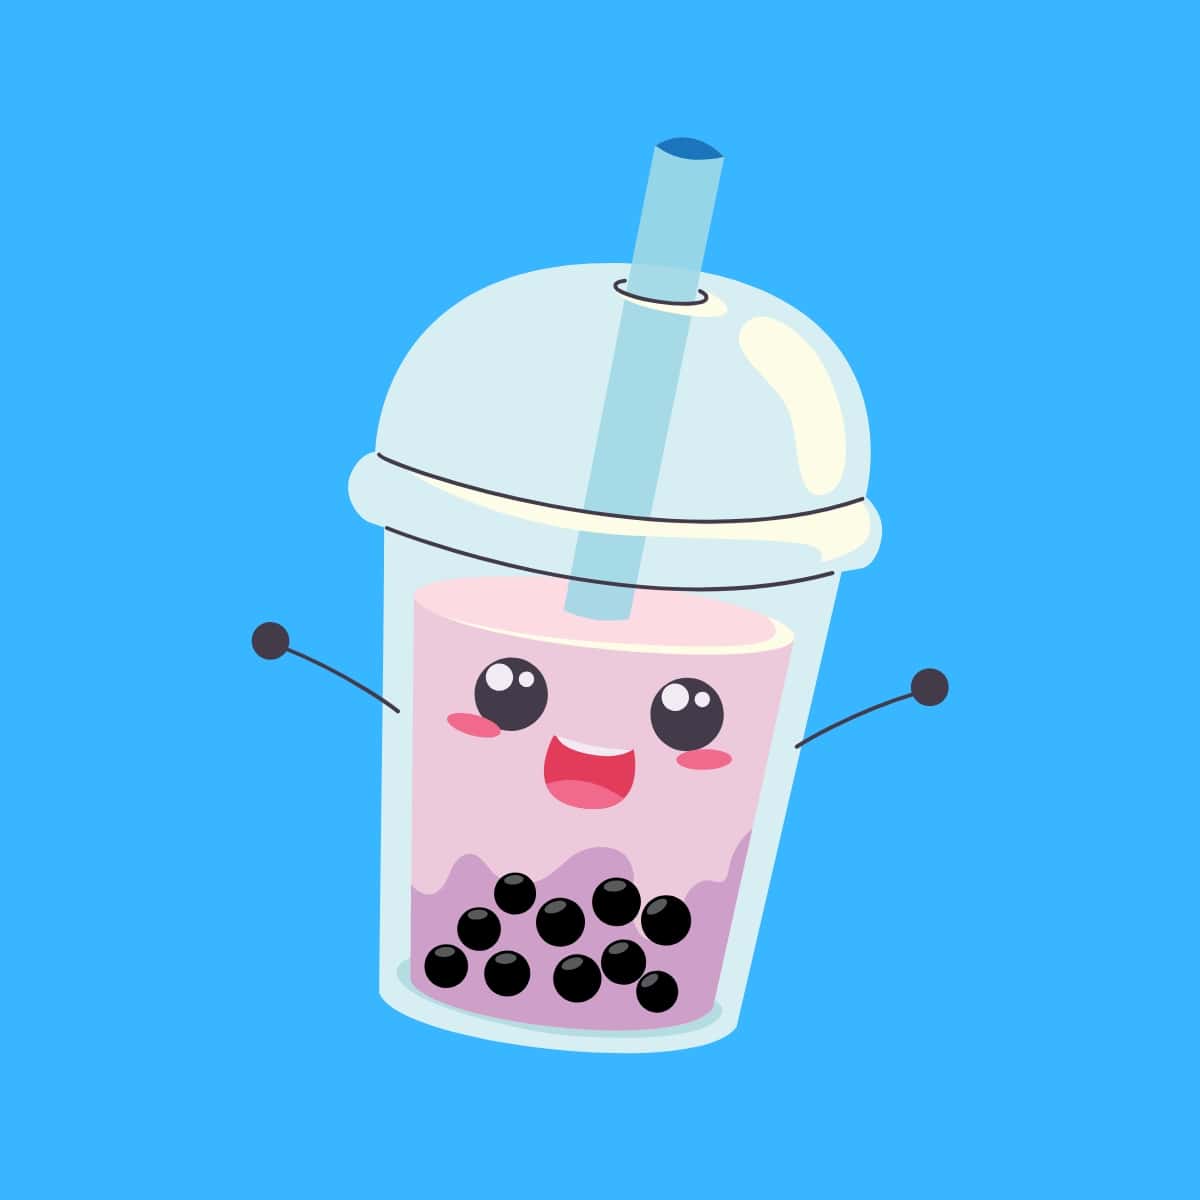 Cartoon graphic of a bubble tea smiling with its arms out on a blue background.